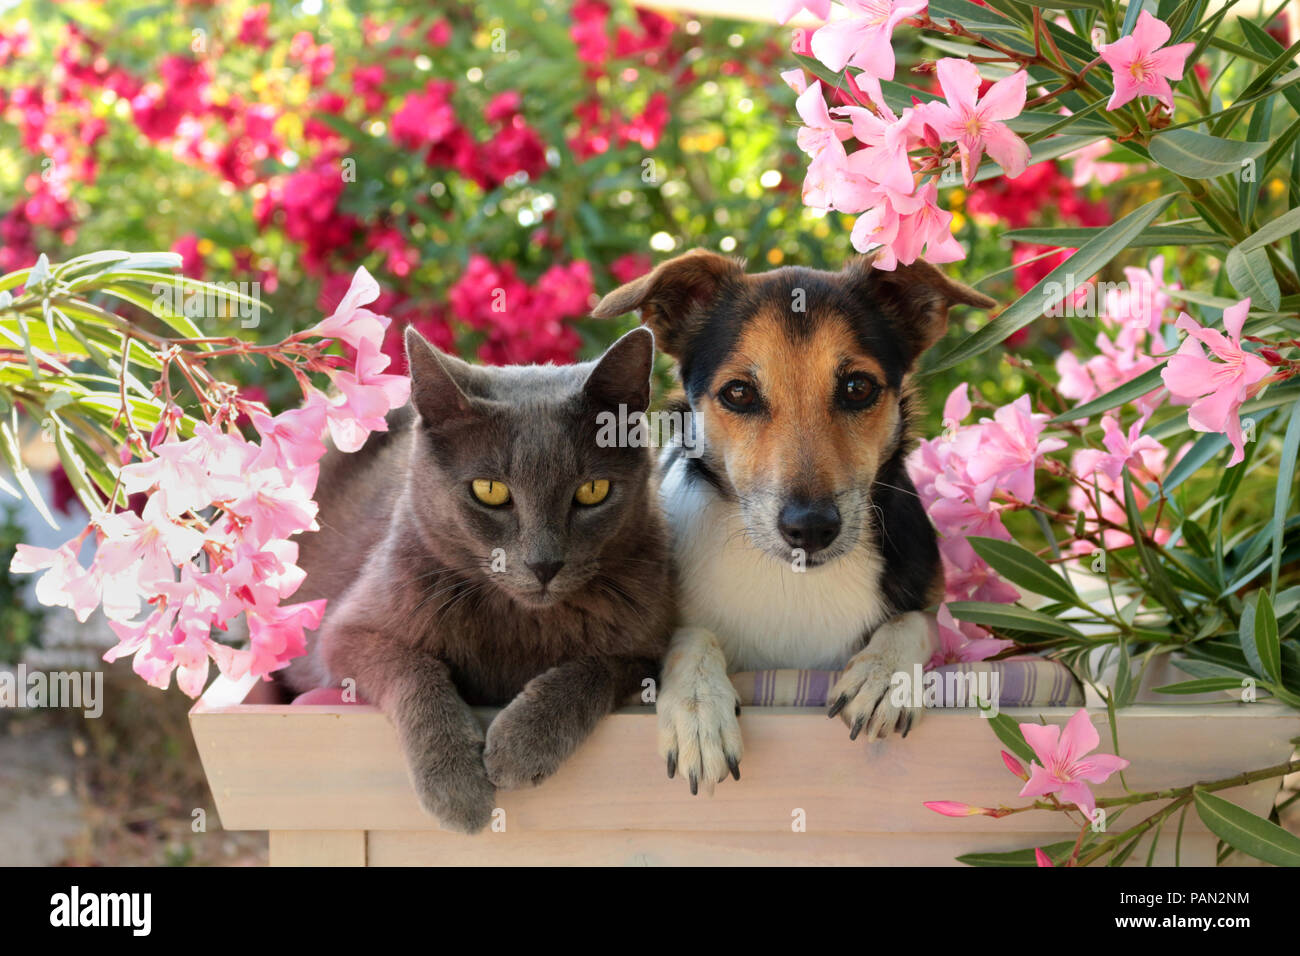 jack russell dog and blue domestic cat lying together in the garden Stock Photo